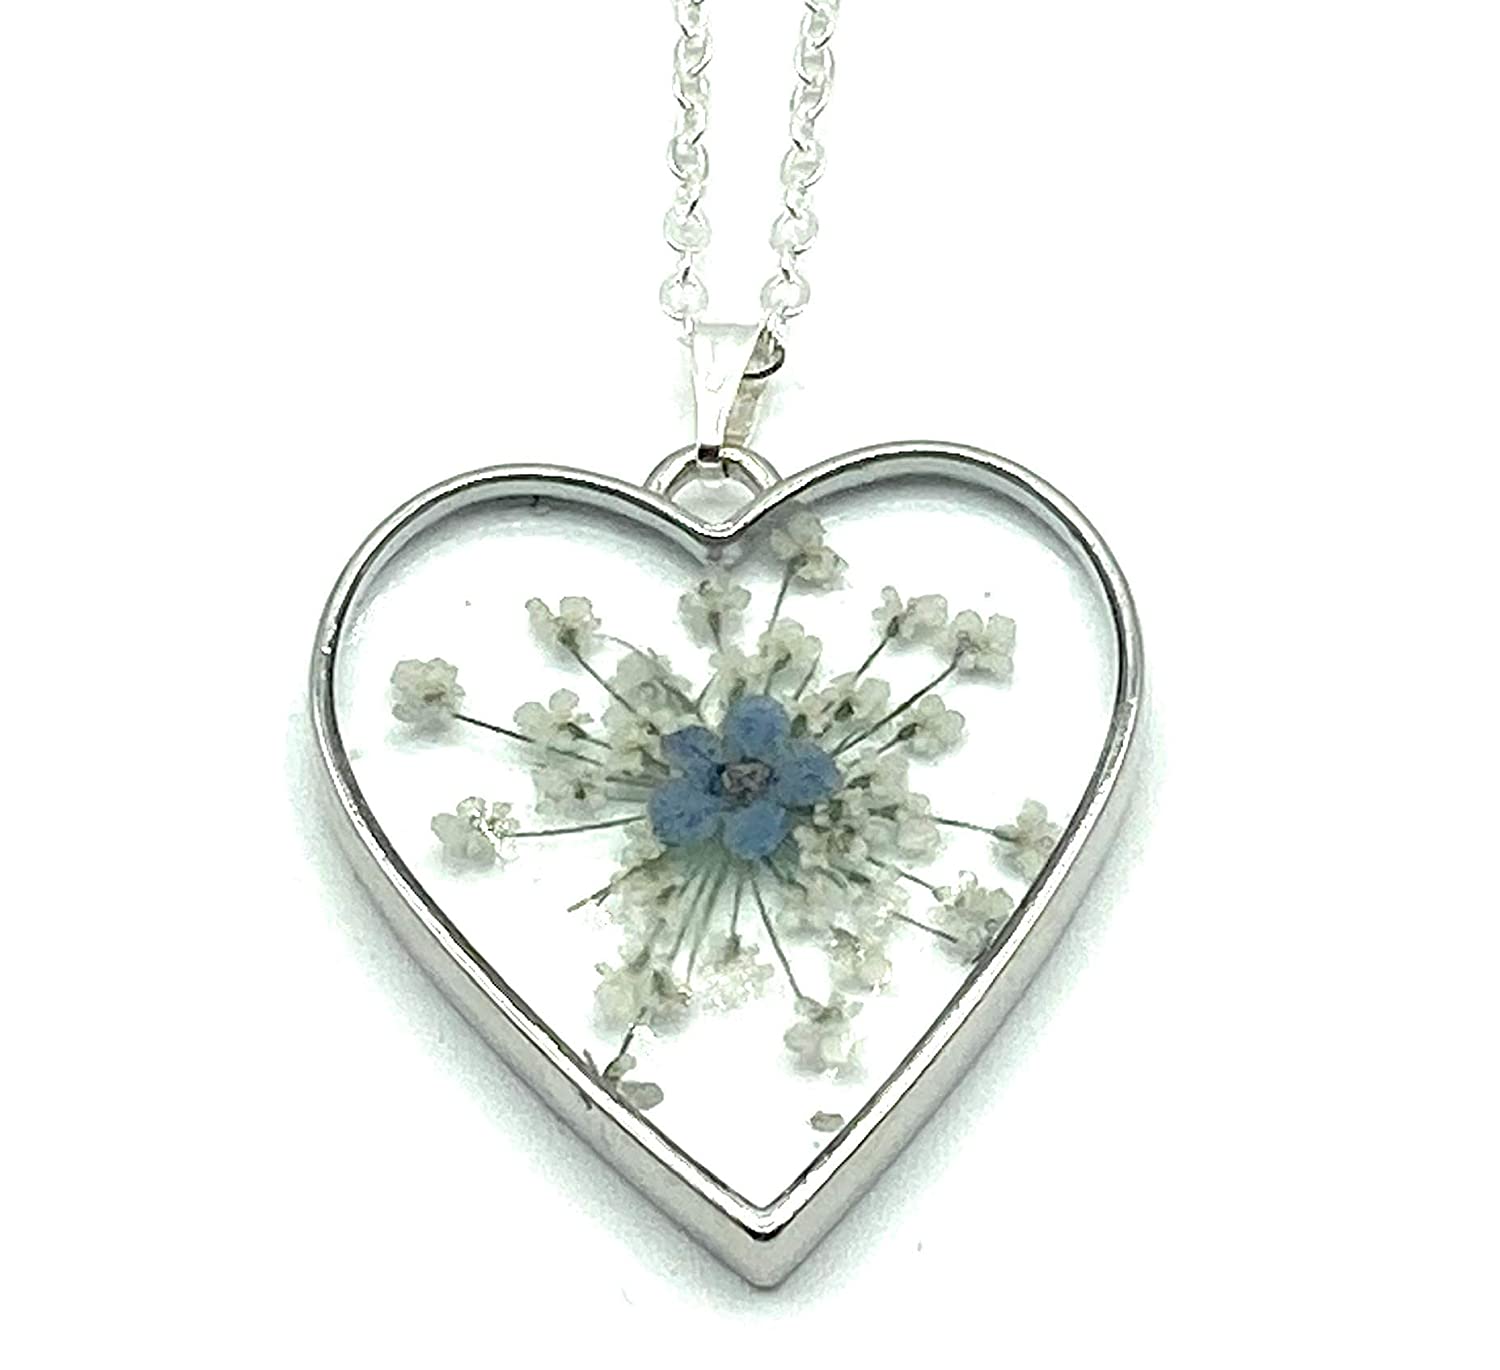 Heart shaped Pressed dried Forget Me Not and Queen Annes Lace Flower Pendant